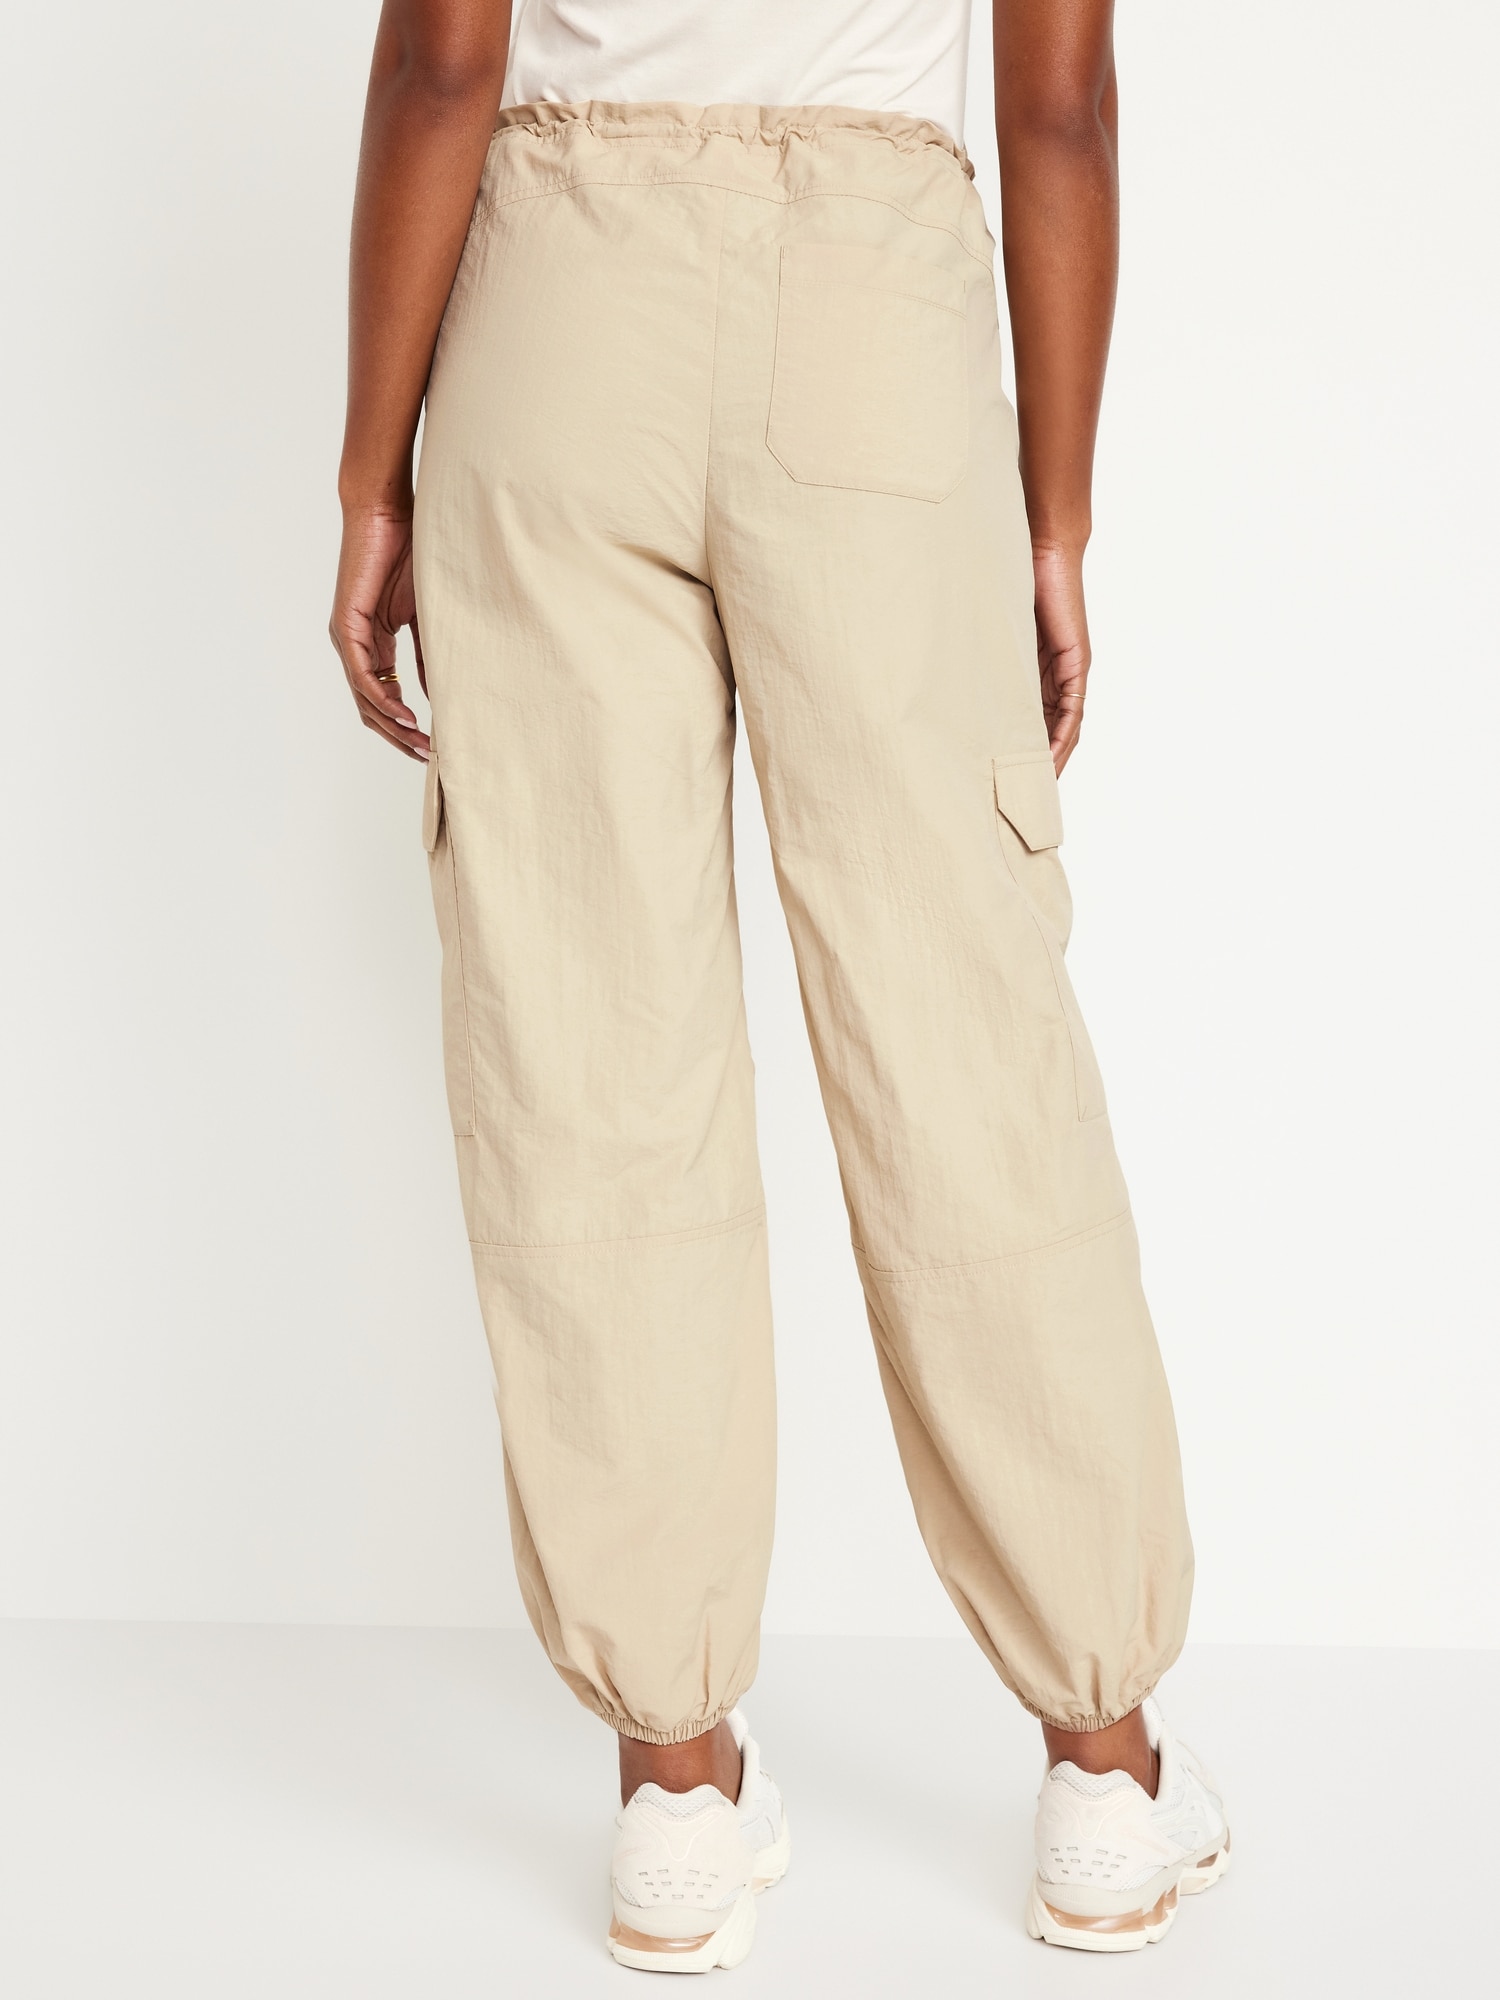 Old Navy Women's Mid-Rise Cargo Pants - - Petite Size S